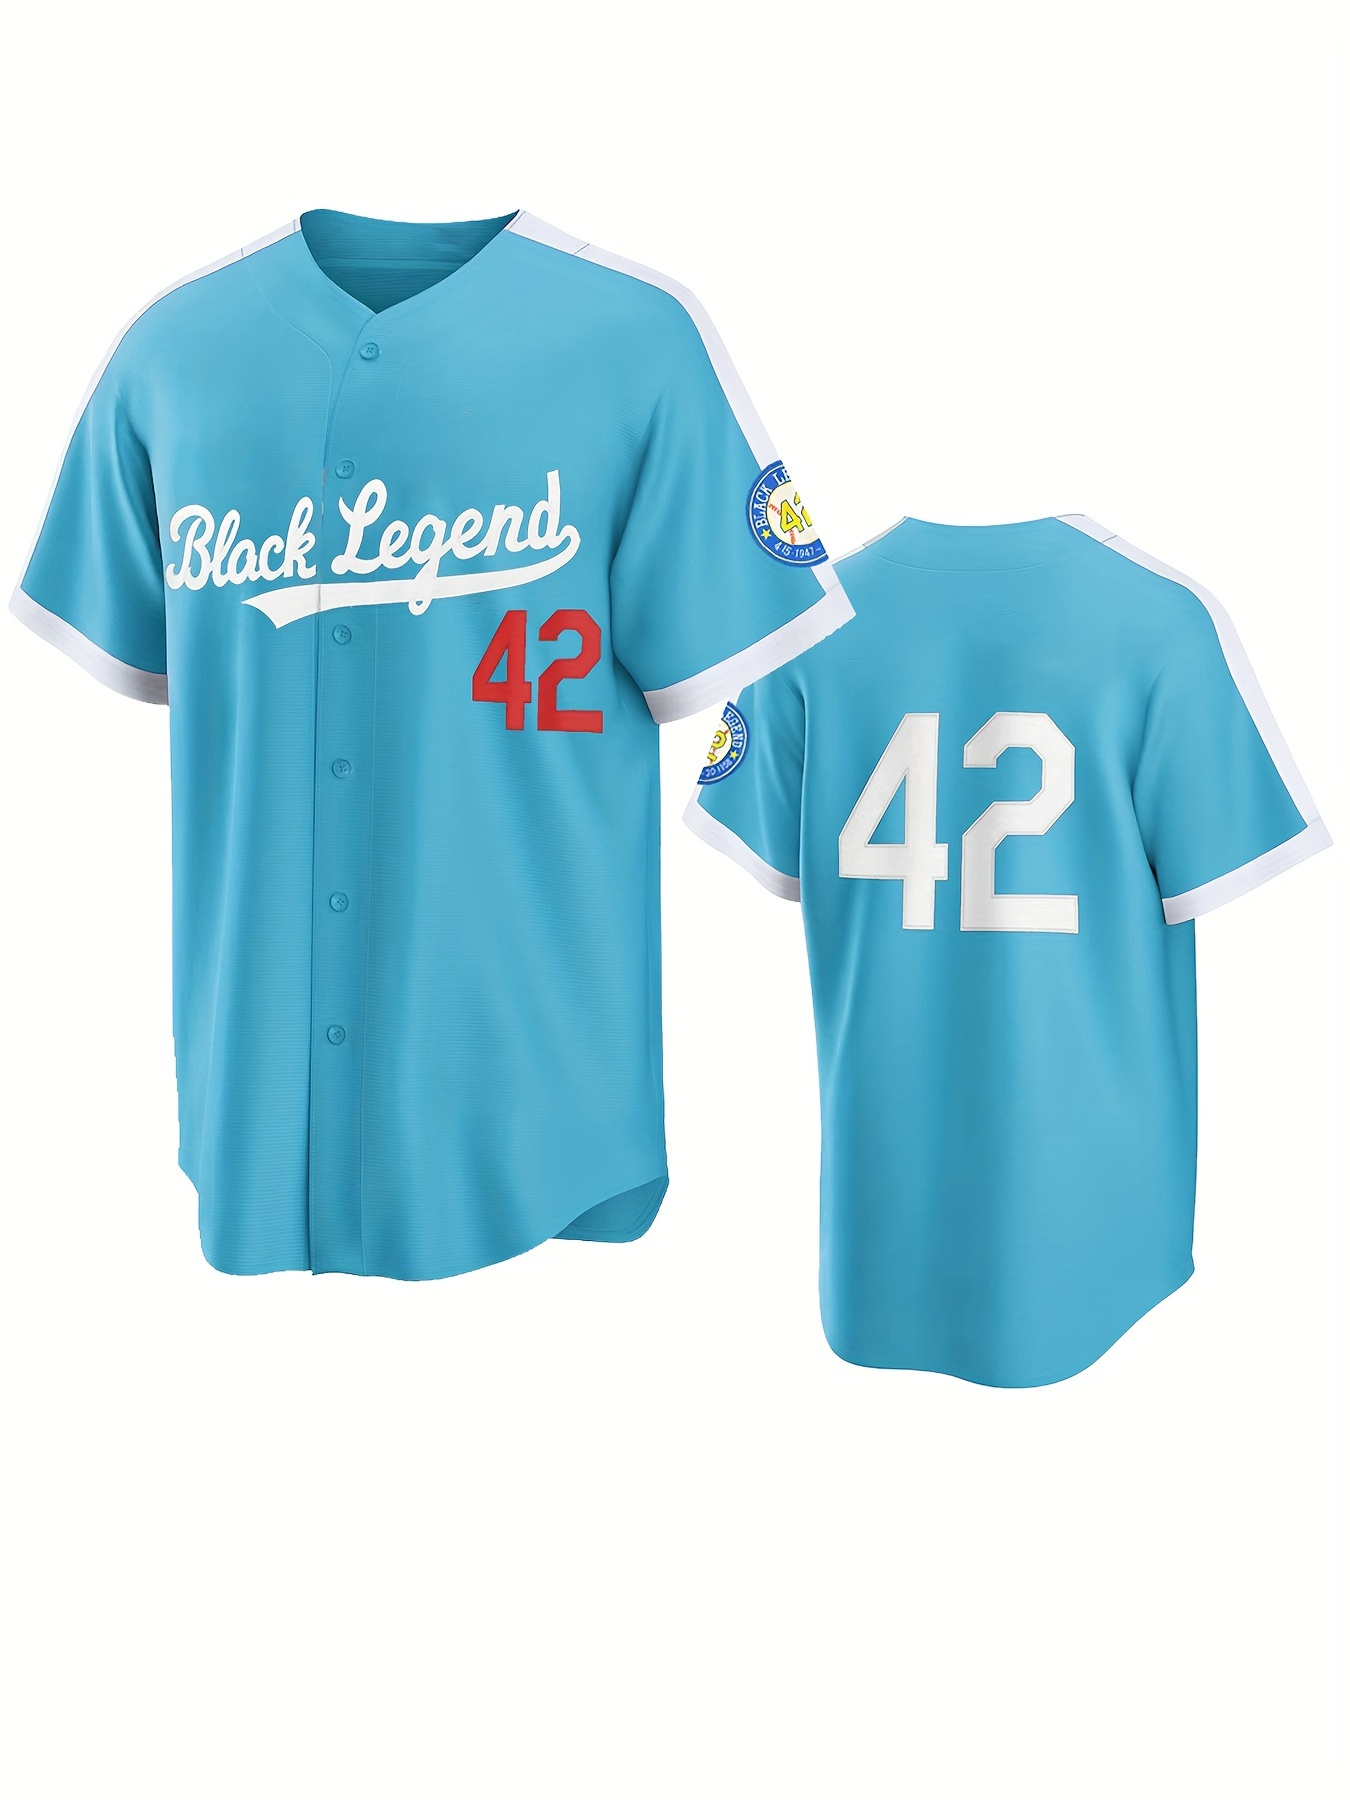 Men's Classic Design #42 Baseball Jersey, Retro Baseball Shirt, Slightly Stretch Breathable Embroidery Button Up Sports Uniform for Training